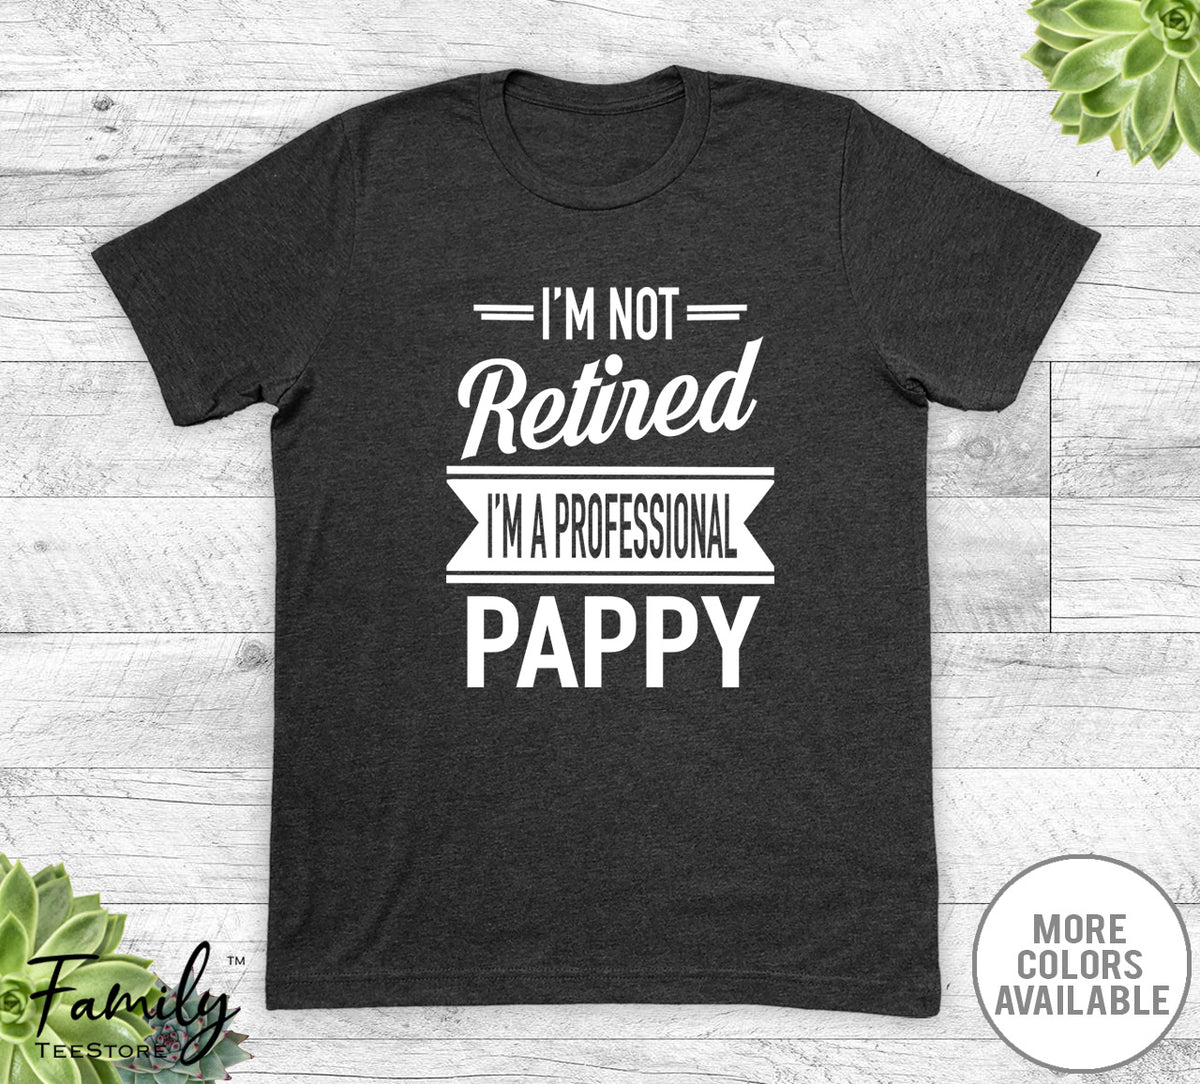 I'm Not Retired I'm A Professional Pappy - Unisex T-shirt - Pappy Shirt - Pappy Gift